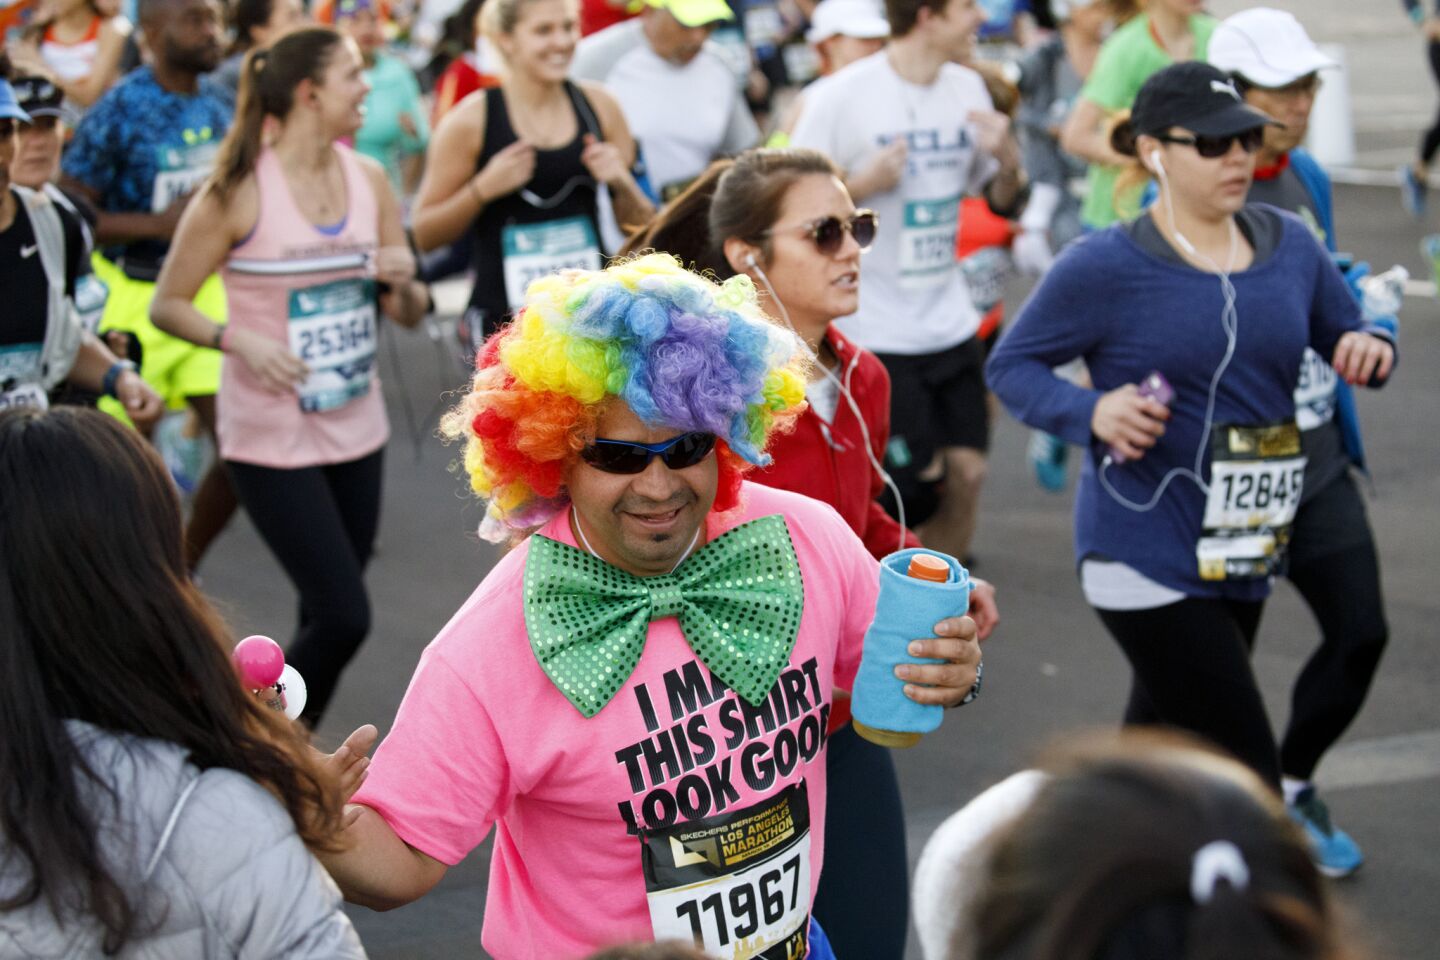 A runner in clown costume at the start of the L.A. Marathon at Dodger Stadium.